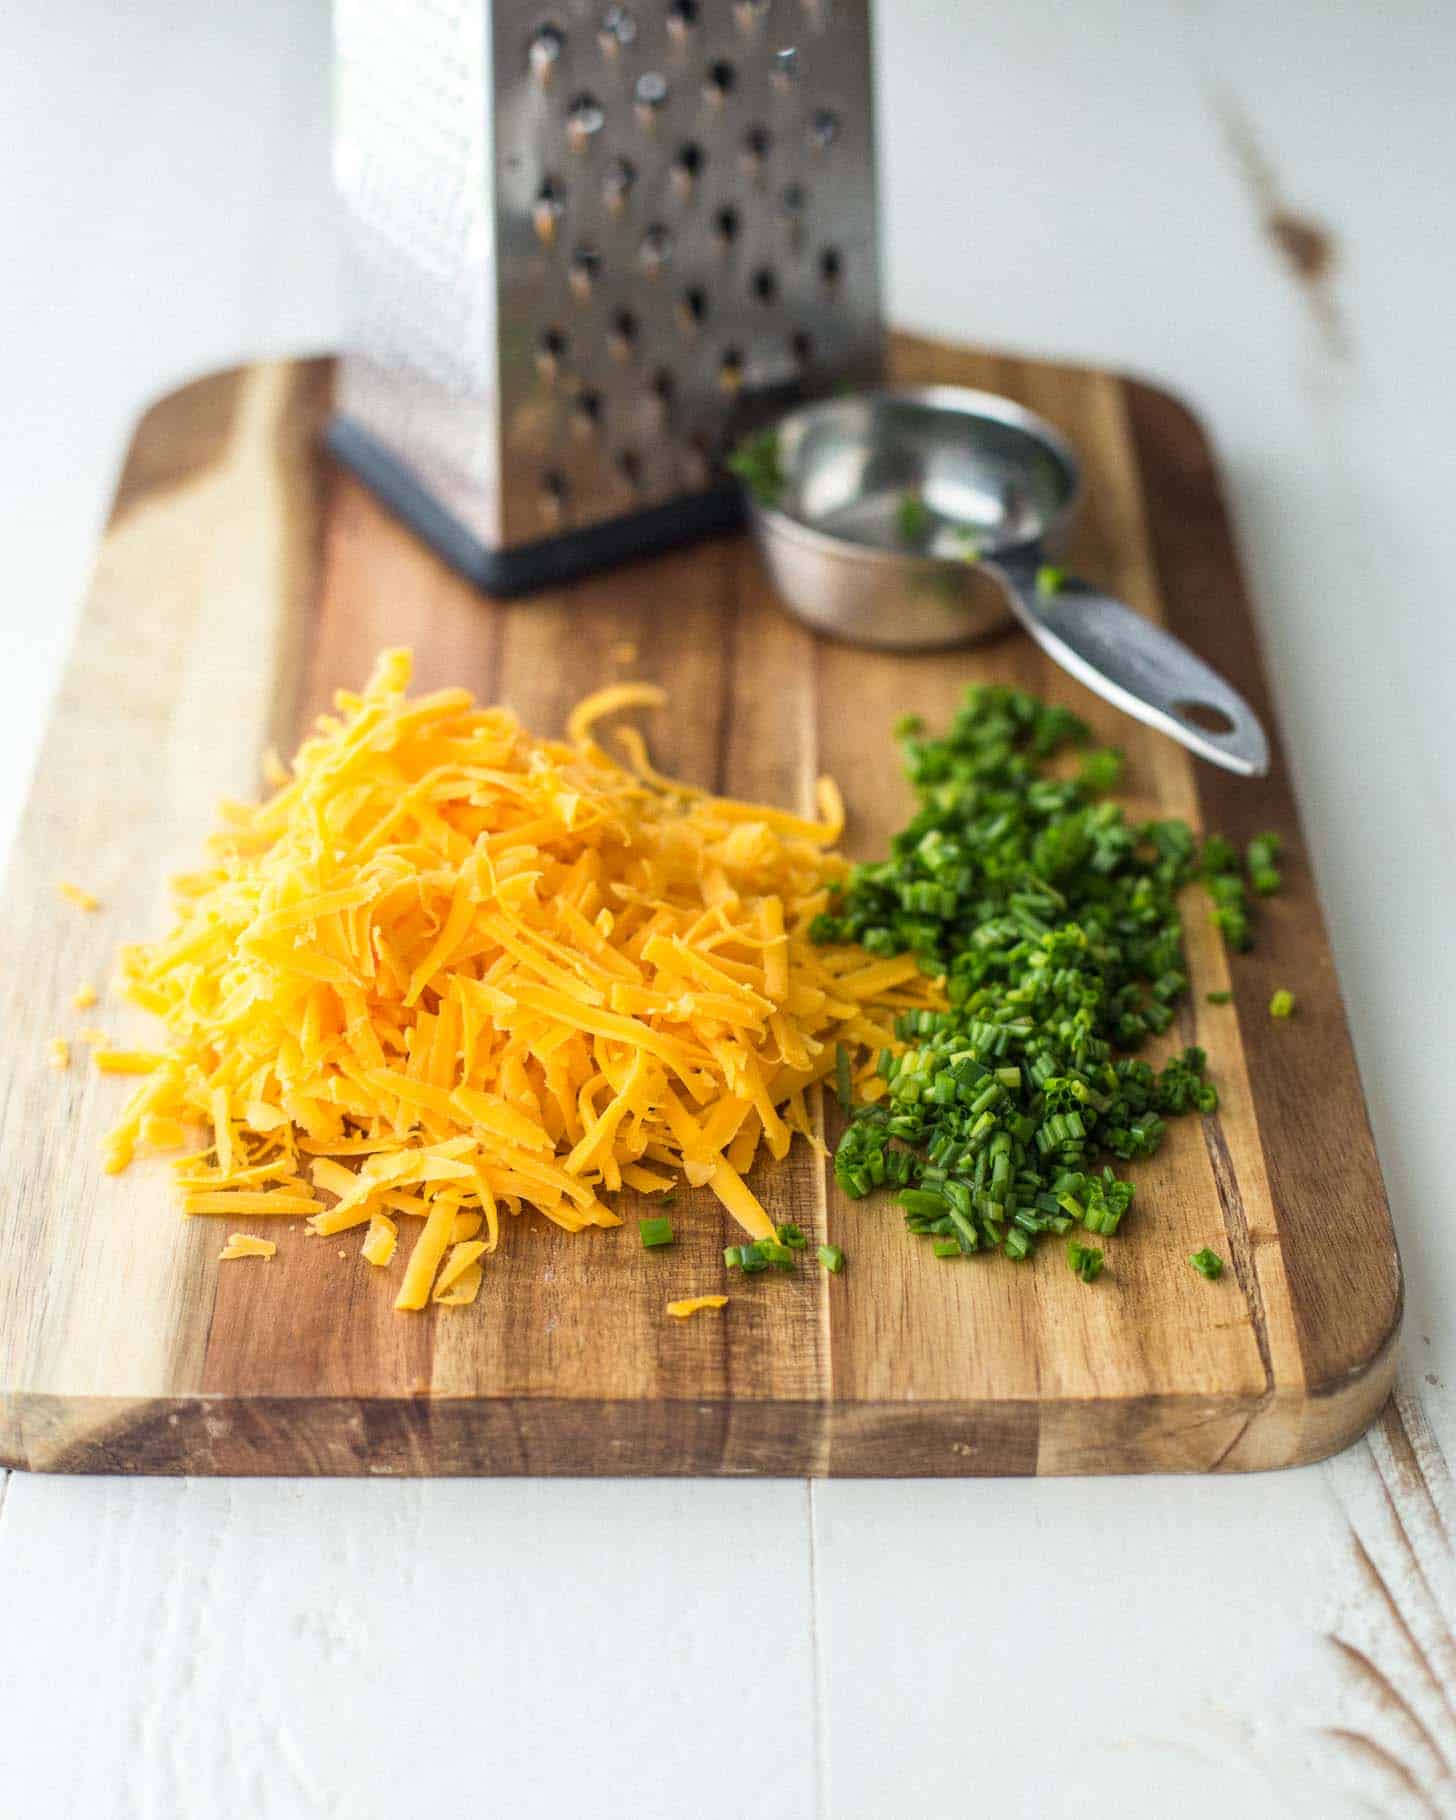 grated cheddar and chives on a wooden cutting board